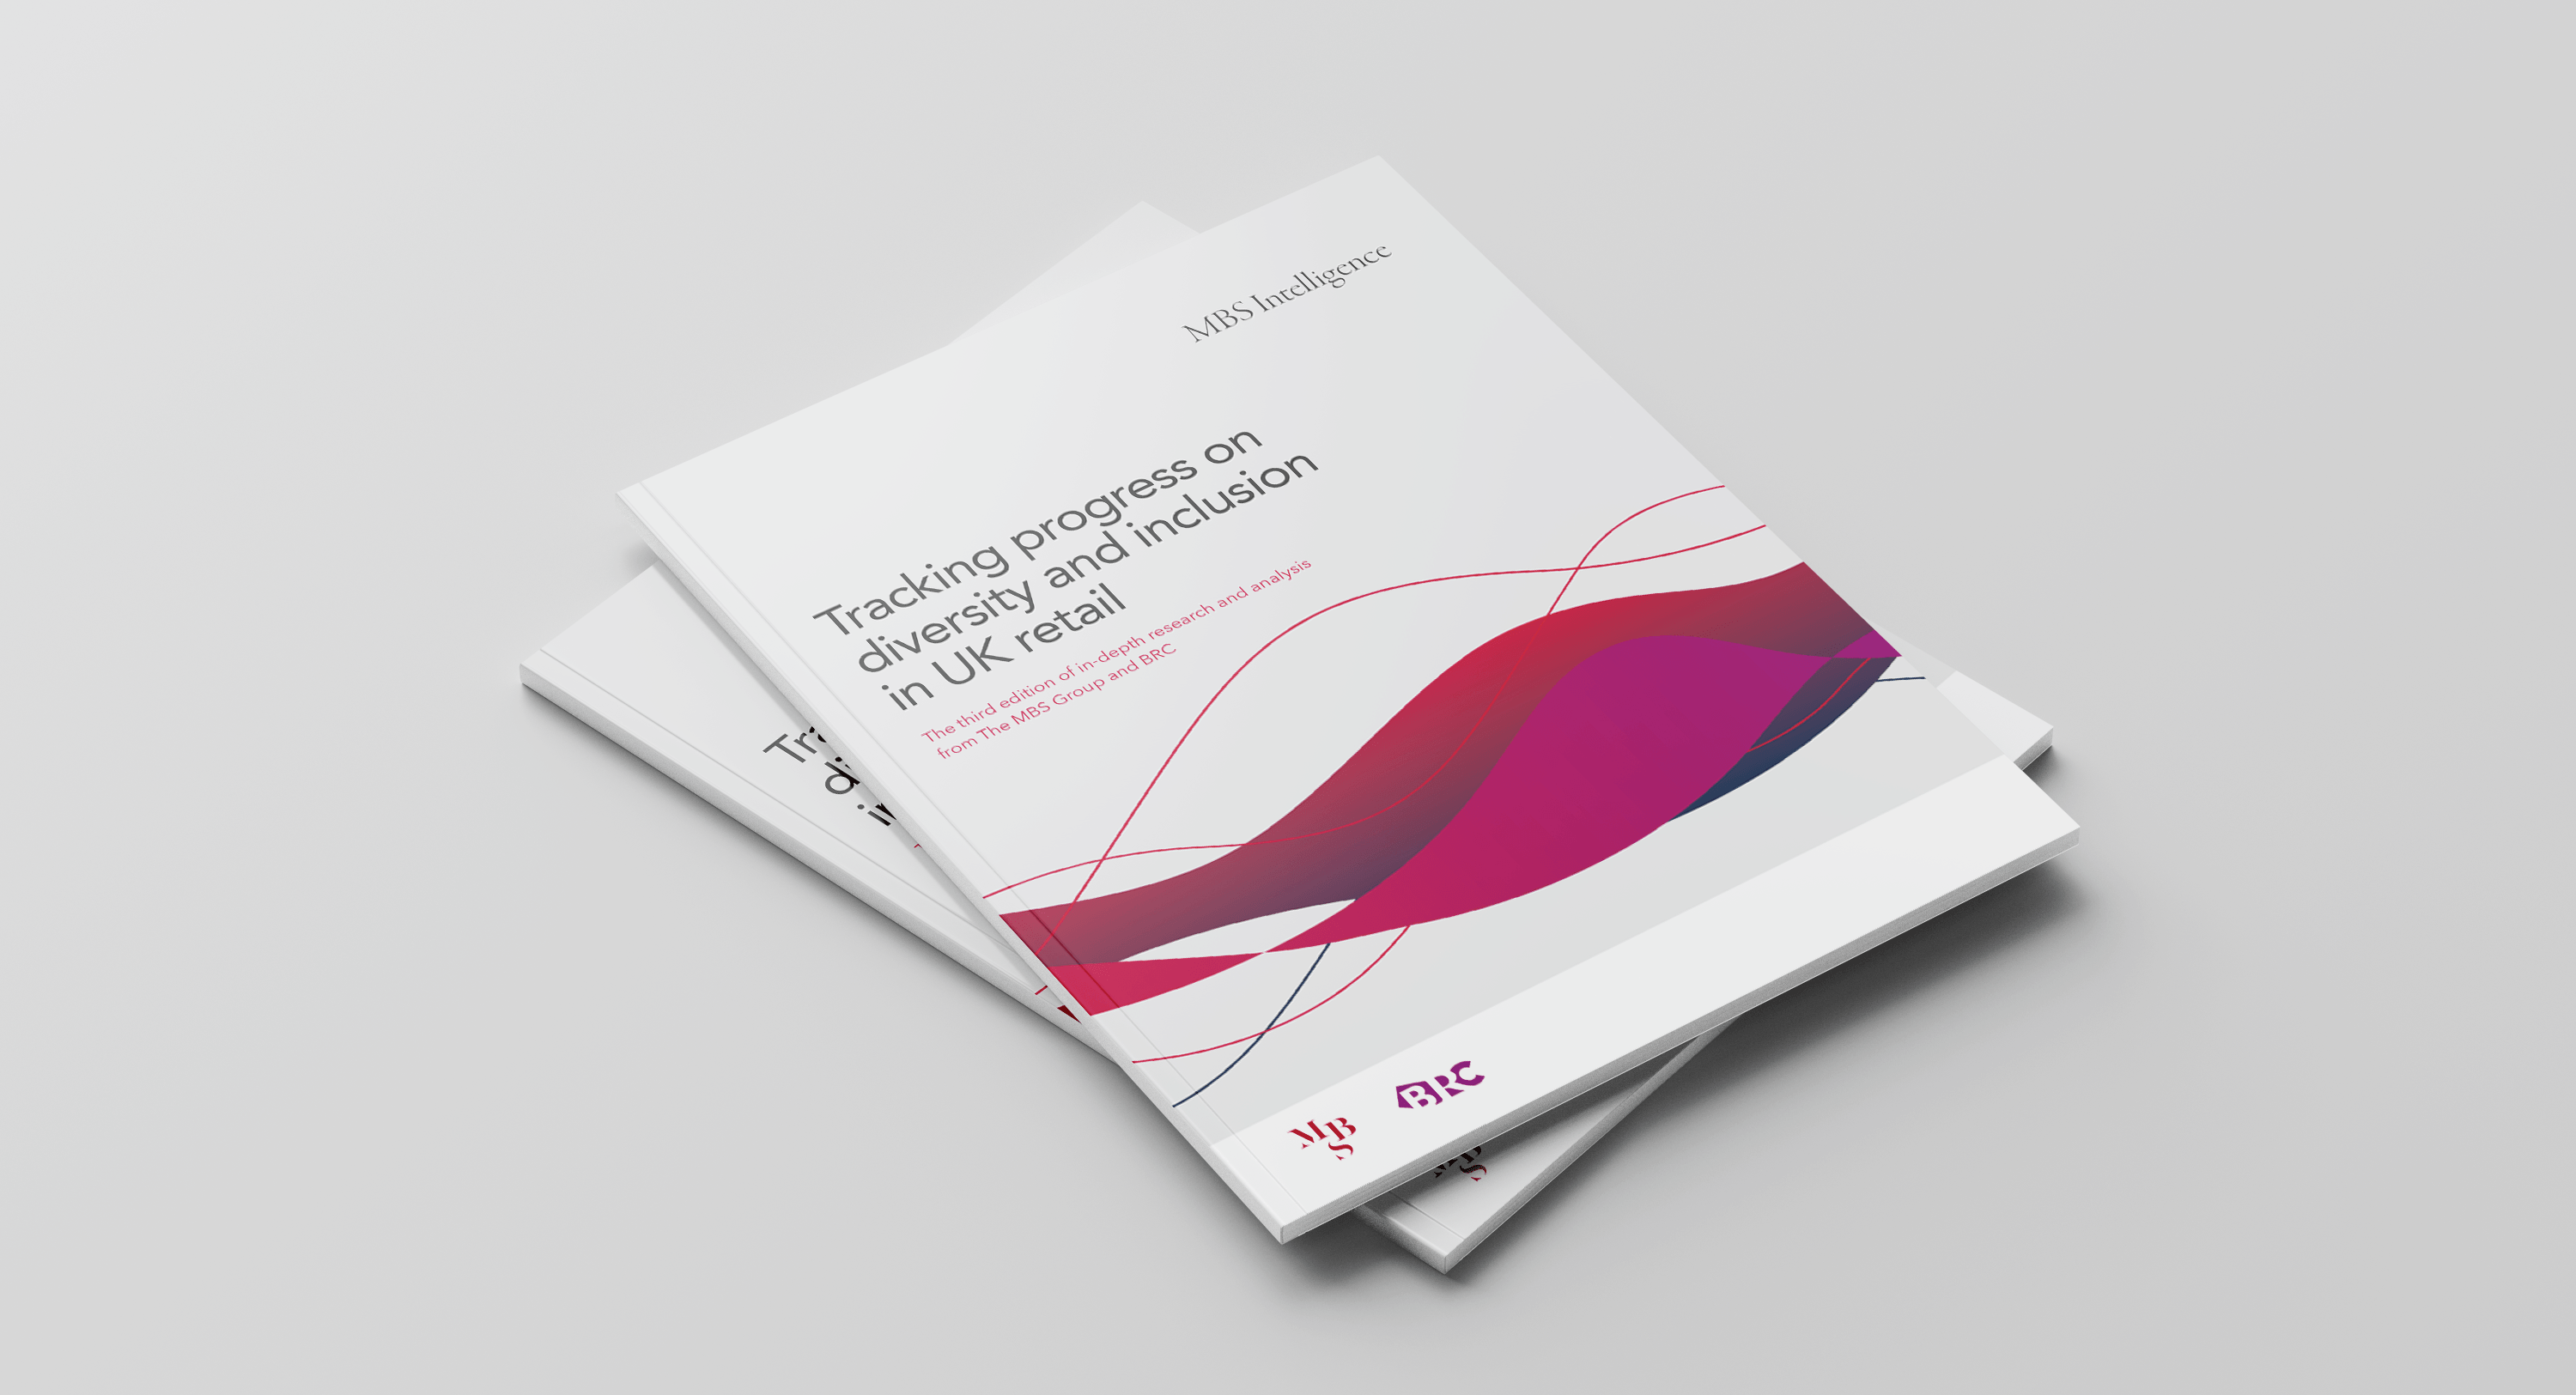 BRC and The MBS Group: Diversity and Inclusion in UK Retail report launch